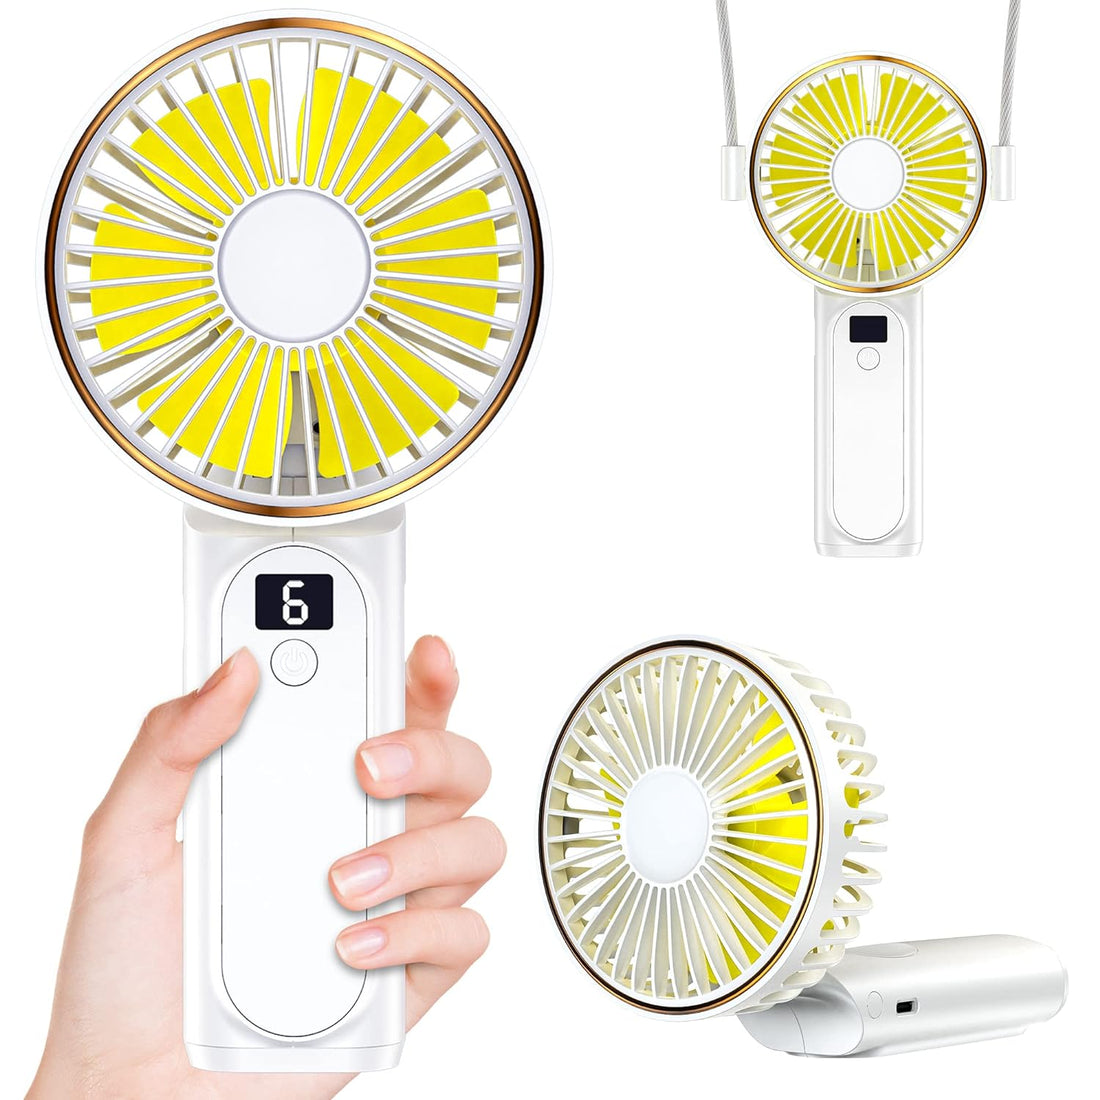 Peiyuu Portable Handheld Fan, Neck Fan, Mini Desk Fan, 4000mAh Long Battery Life, USB Can Charge Mobile Phones, Extremely Quiet, Safe and Reliable, 6-Speed Visual Adjustment(White)